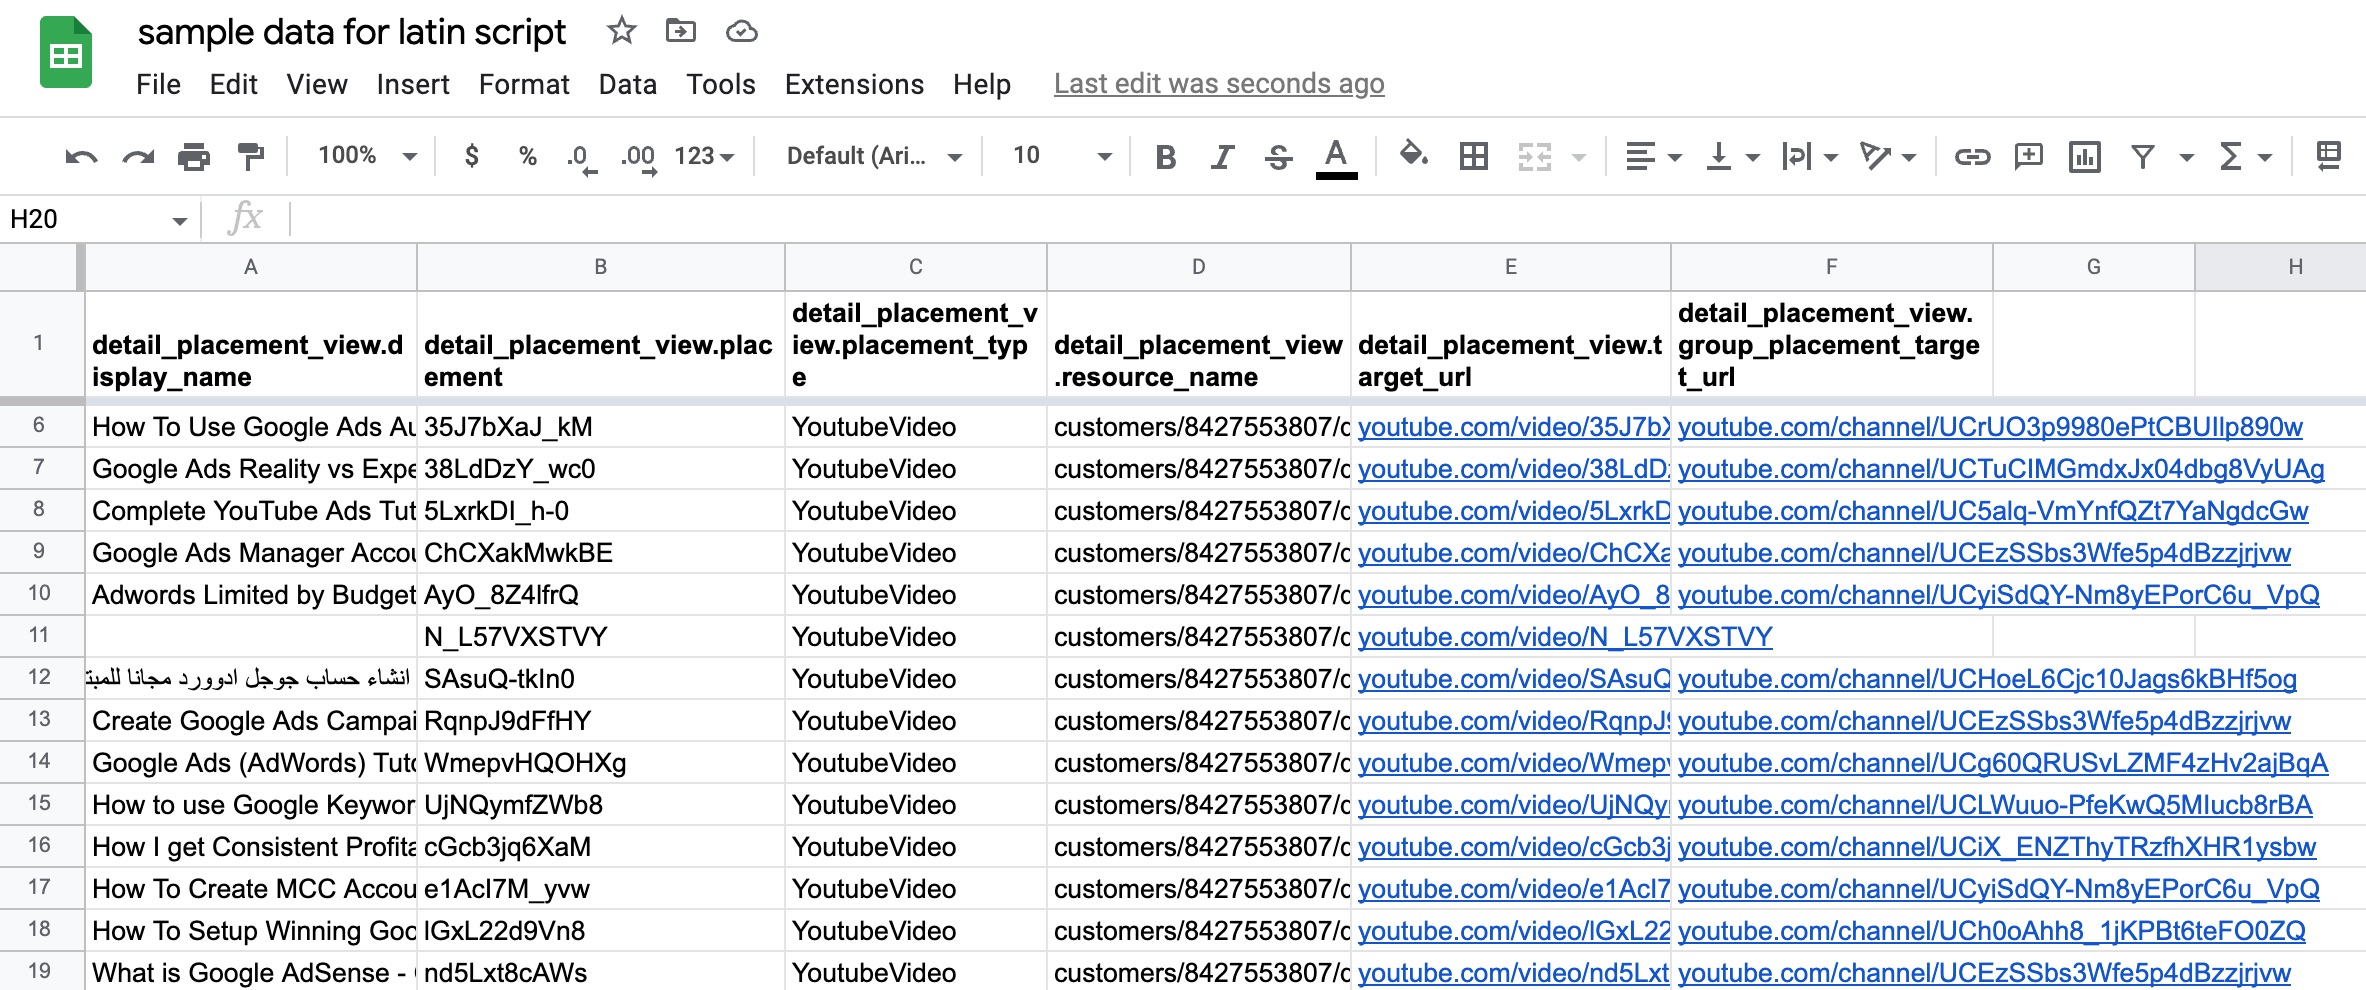 Placement details data in Google Spreadsheet